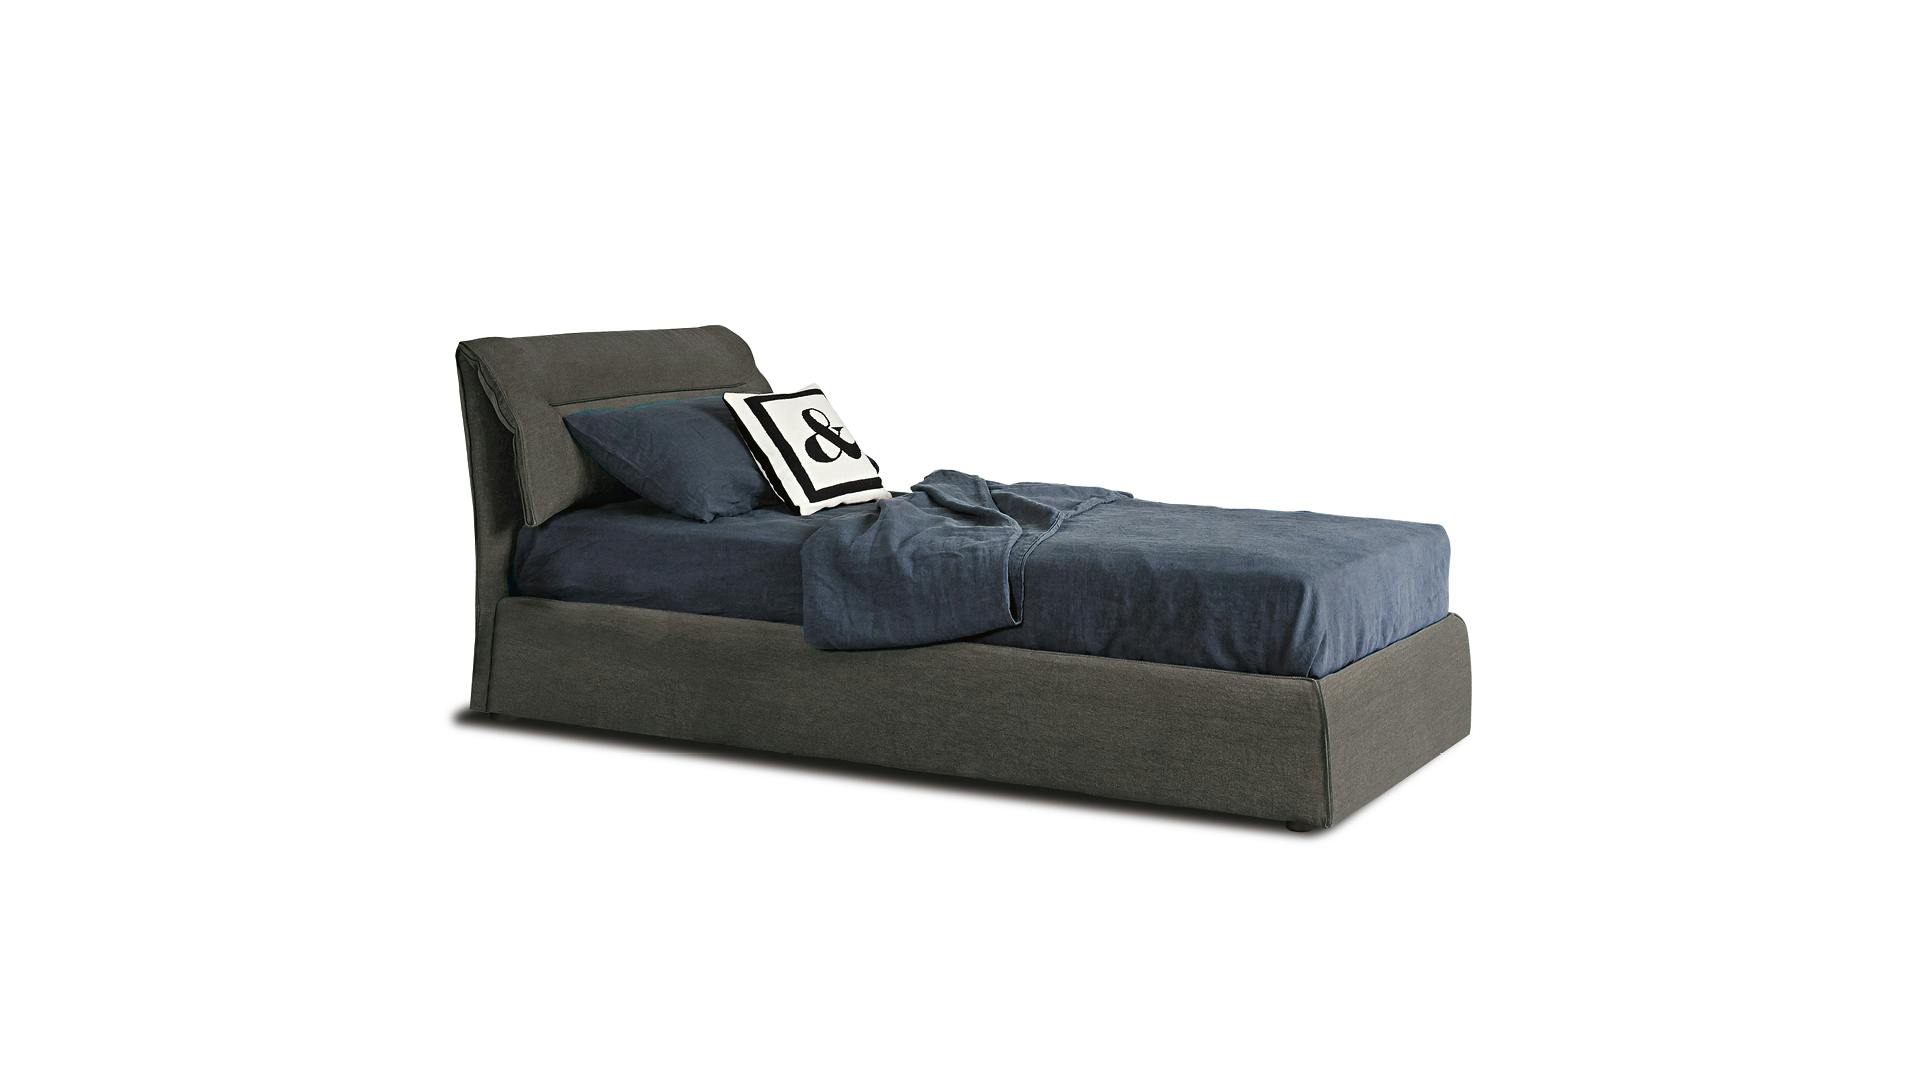 Campo single bed